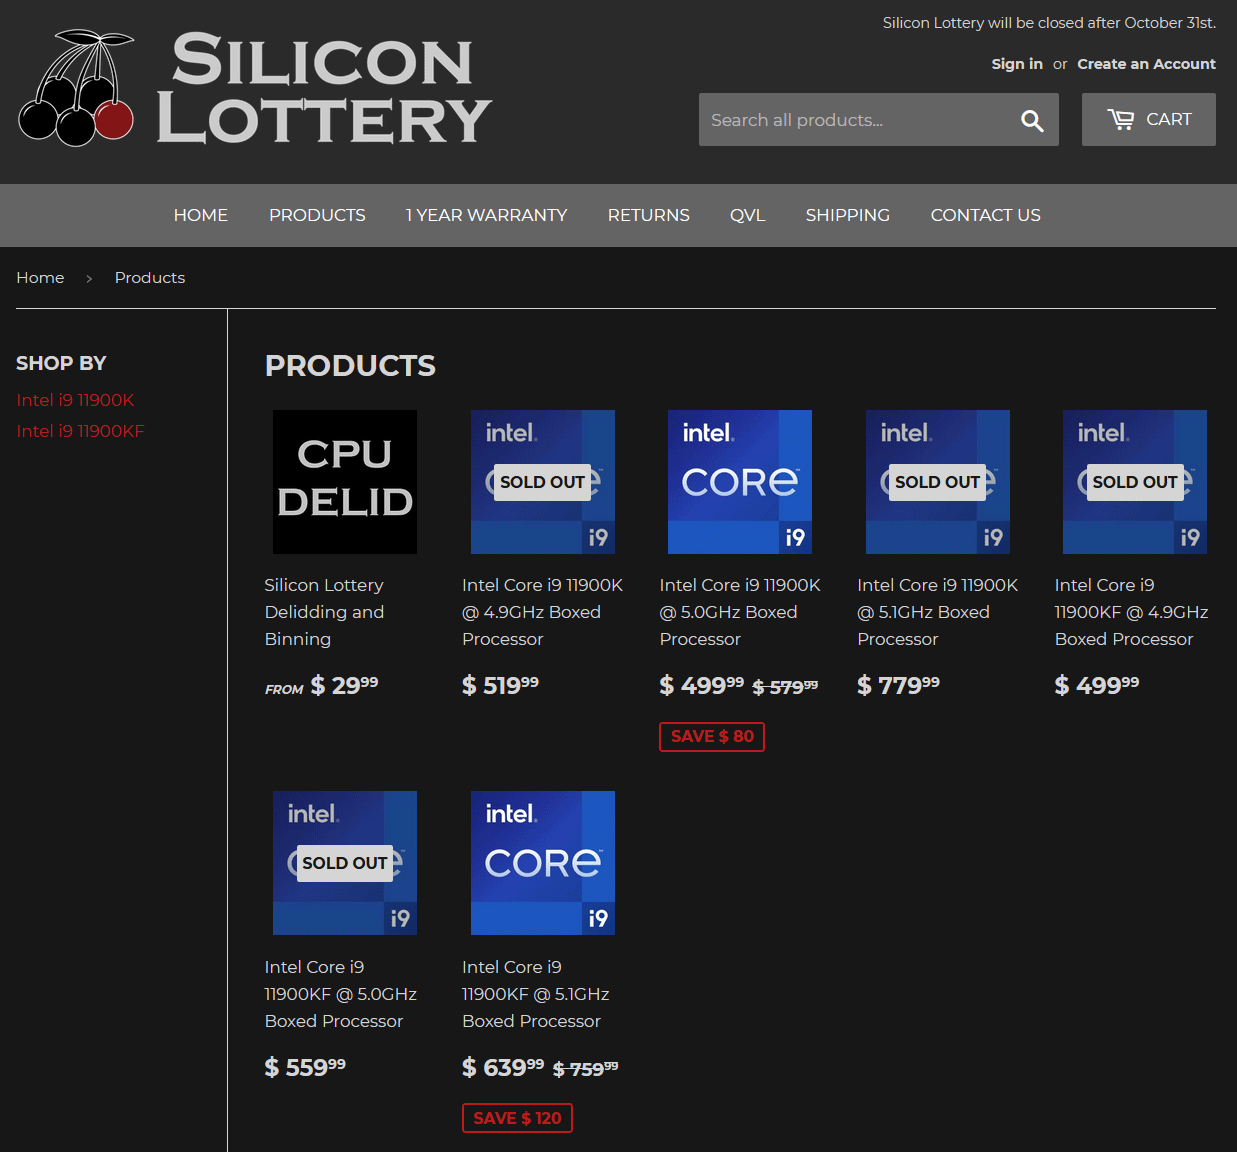 Silicon Lottery